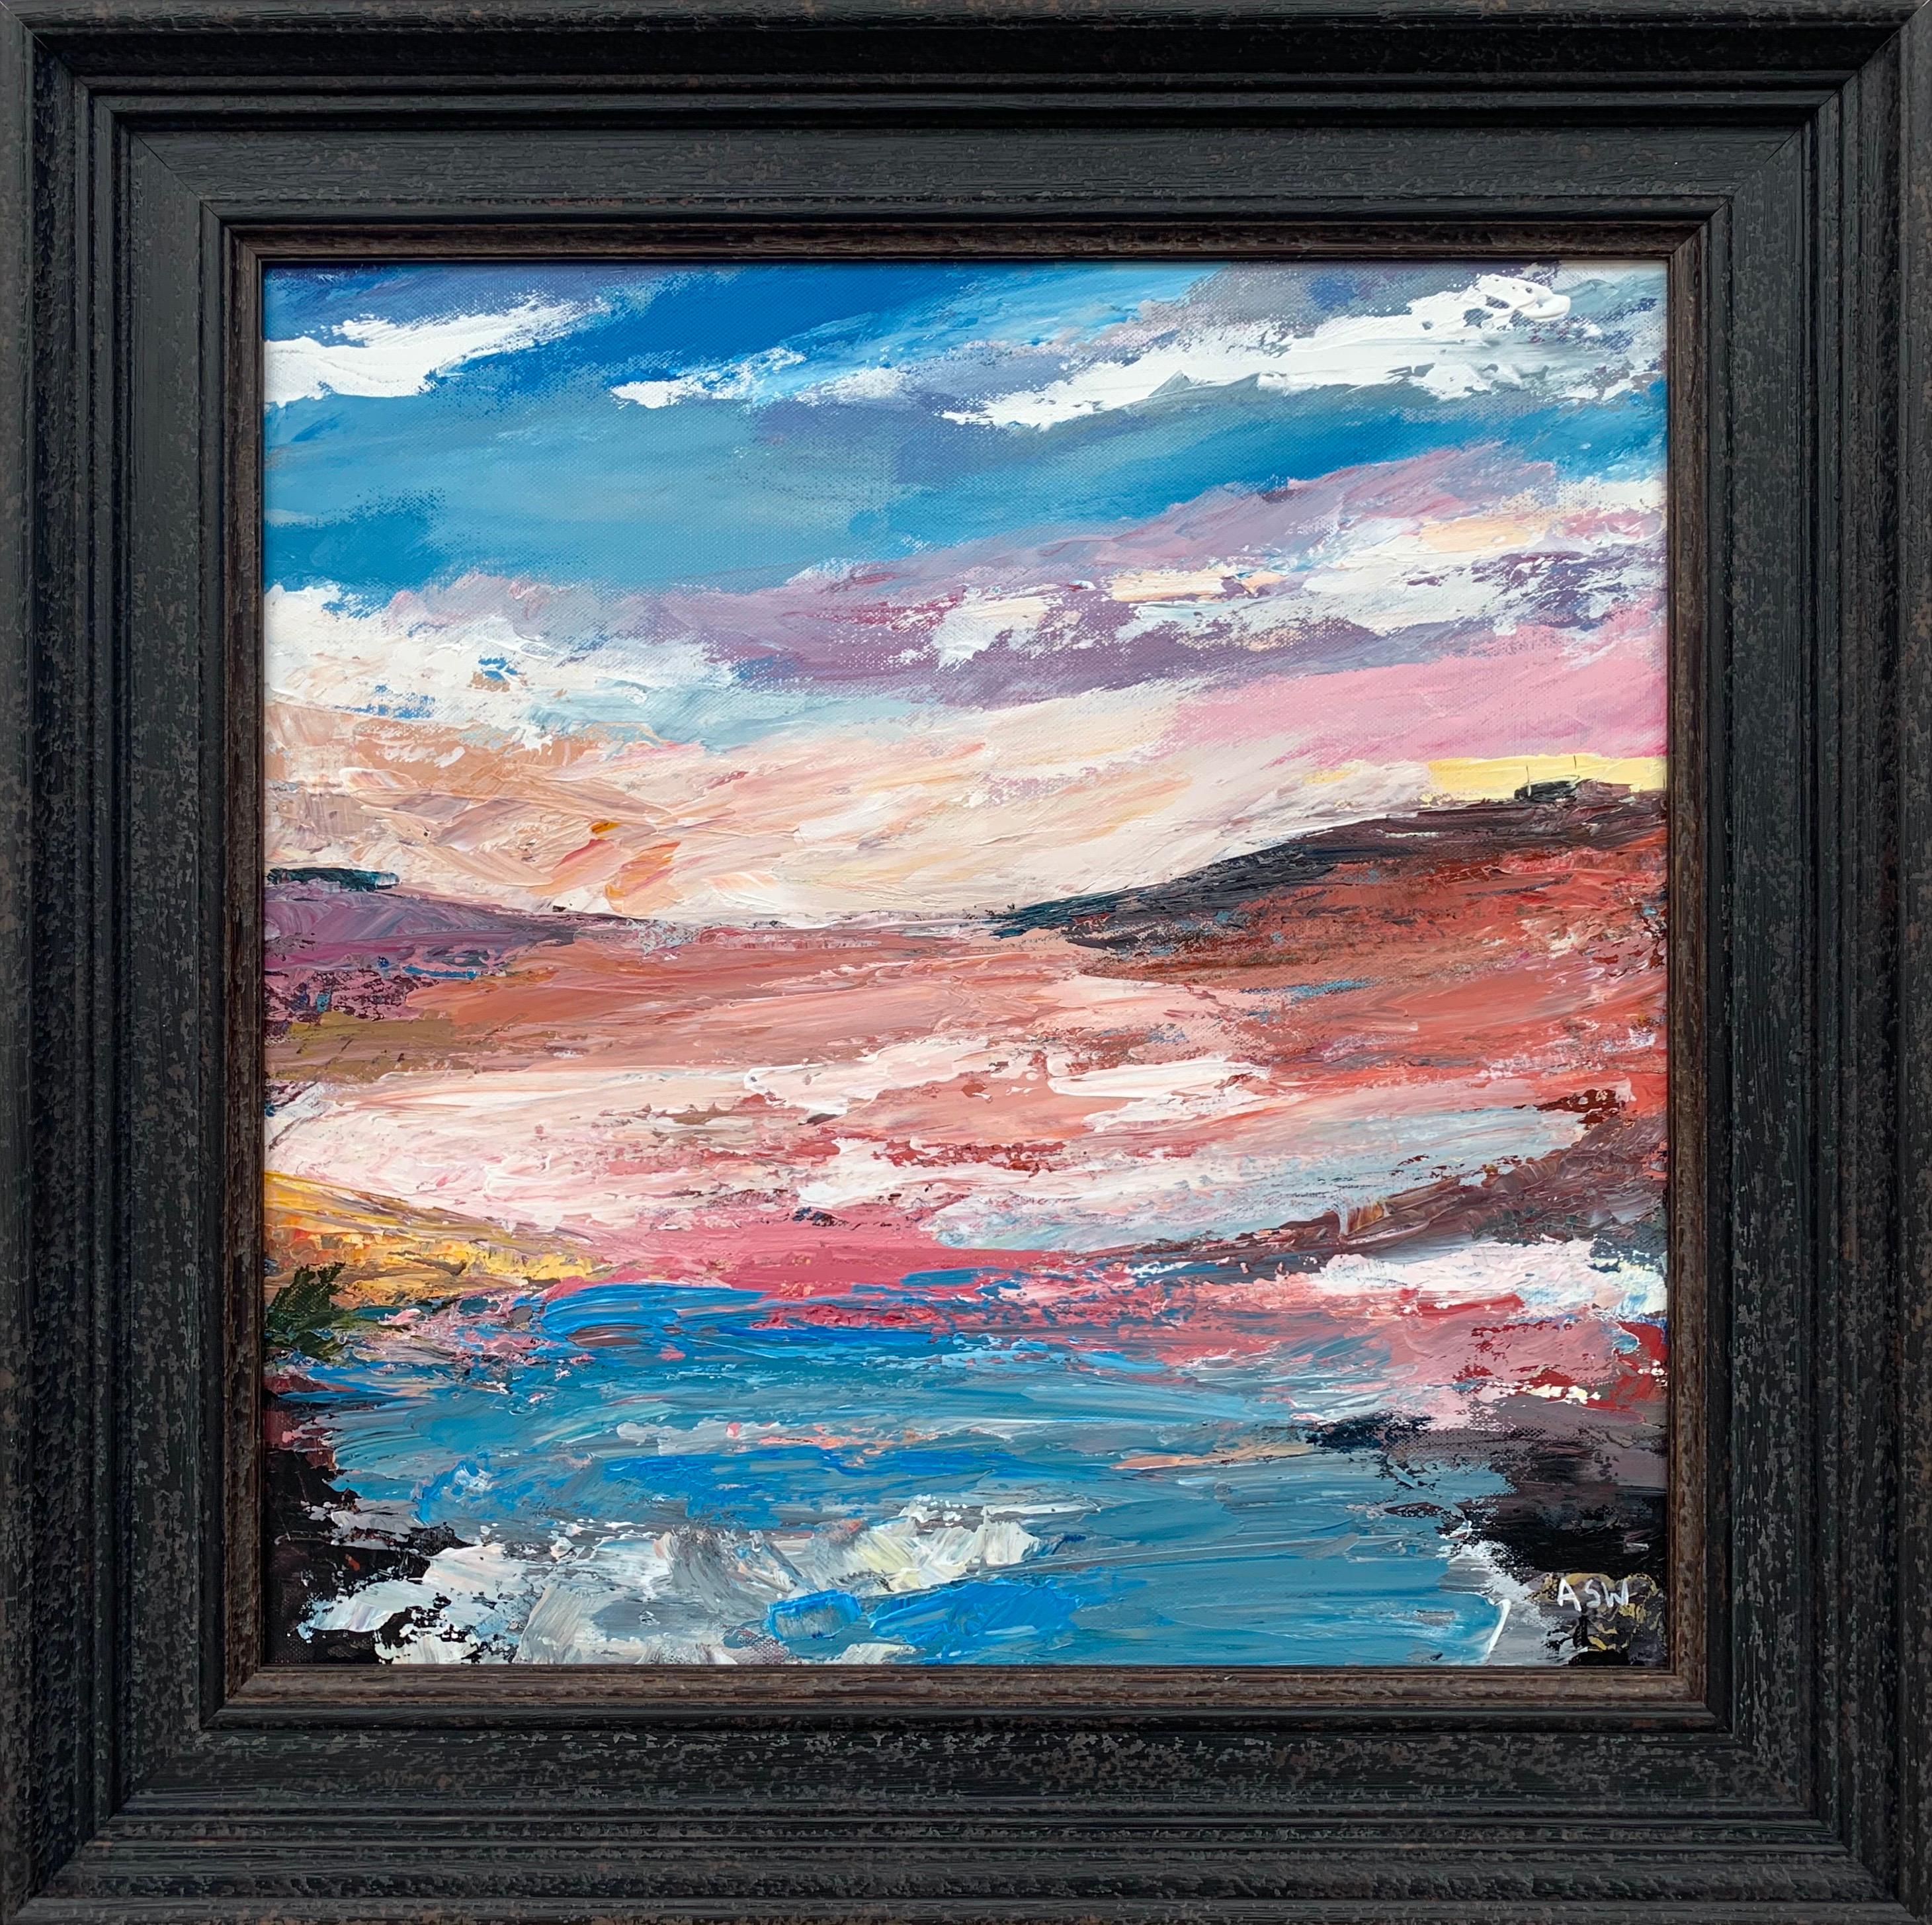 Pink & Blue Expressive Abstract Lake Seascape by Contemporary British Artist